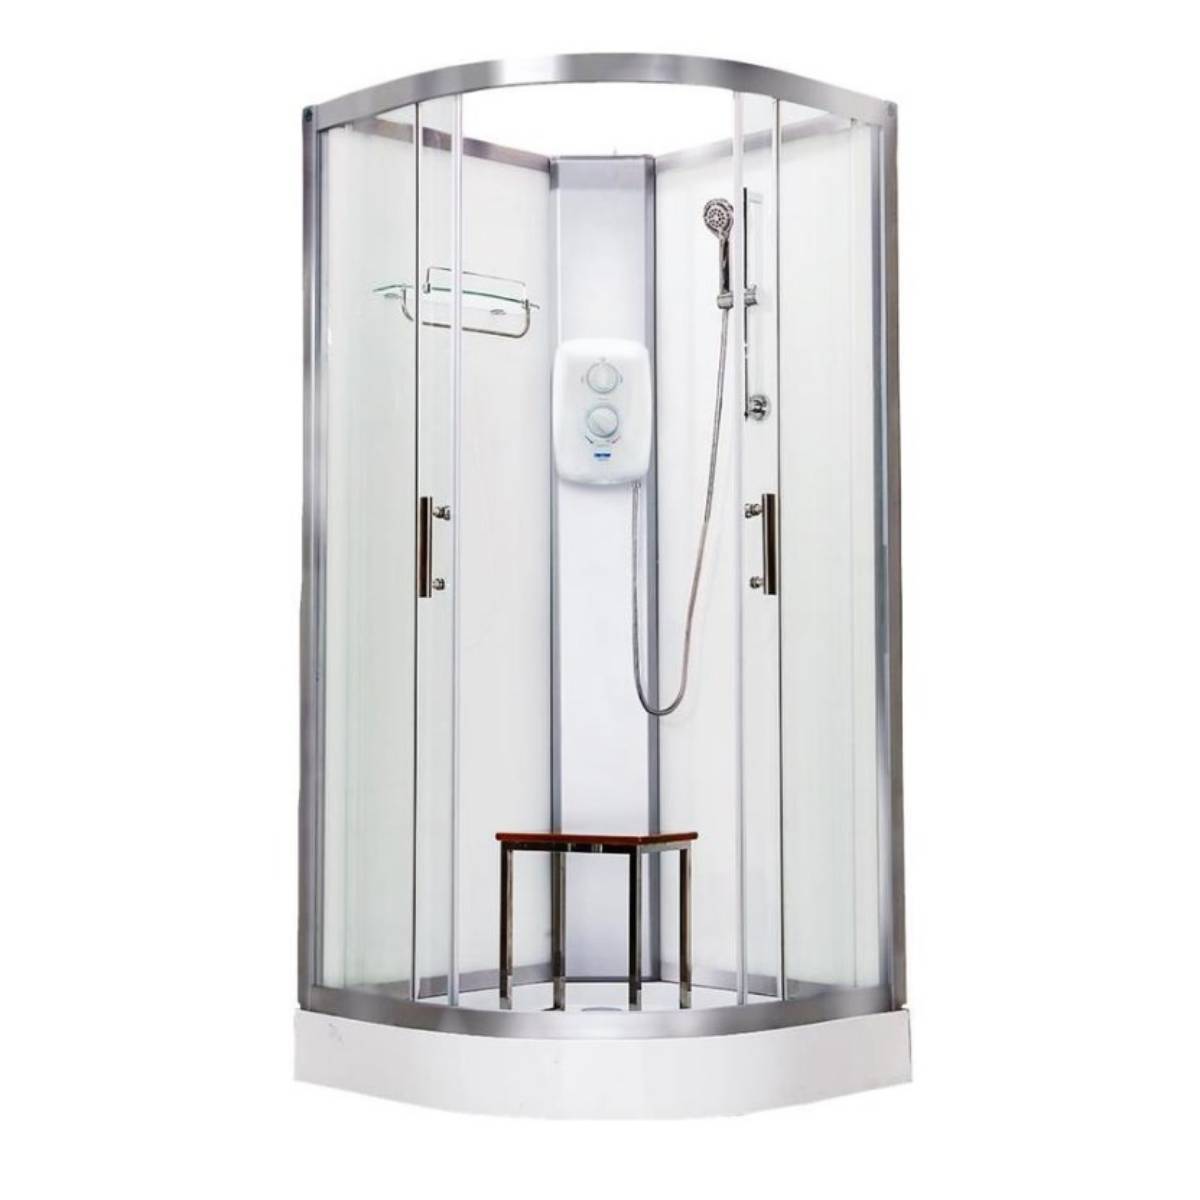 Vidalux Pure Electric 1000mm Shower Cabin White - Standard 8.5KW (11628)